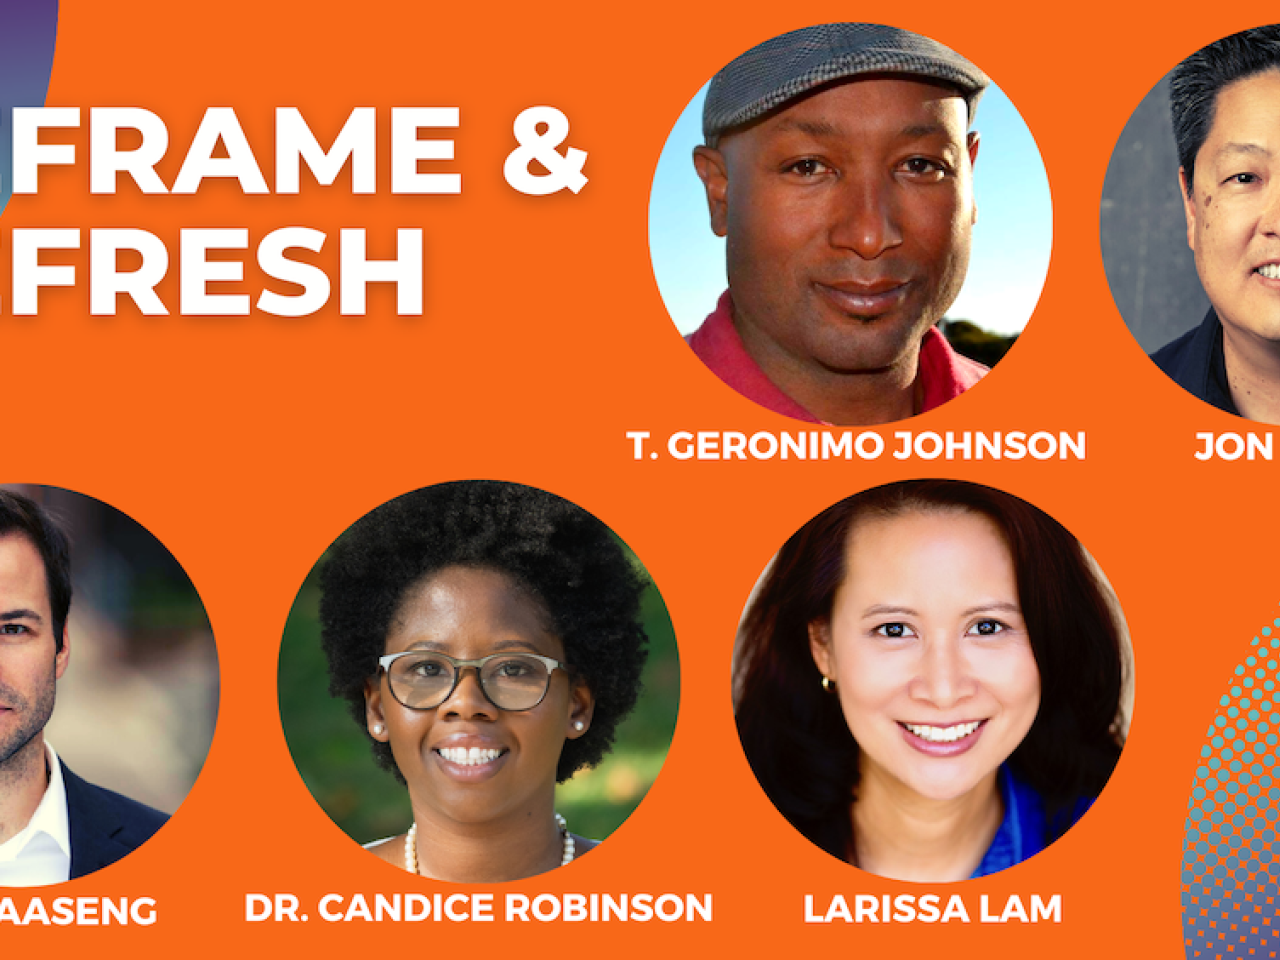 portraits of T Geronimo Johnson a black man wearing a hat Jon Osaki an Asian man Josh Aaseng a white man Dr. Candice Robinson a black woman wearing glasses and Larissa Lam an Asian woman on an orange background with blue half circle gradient design Text reads reframe and refresh